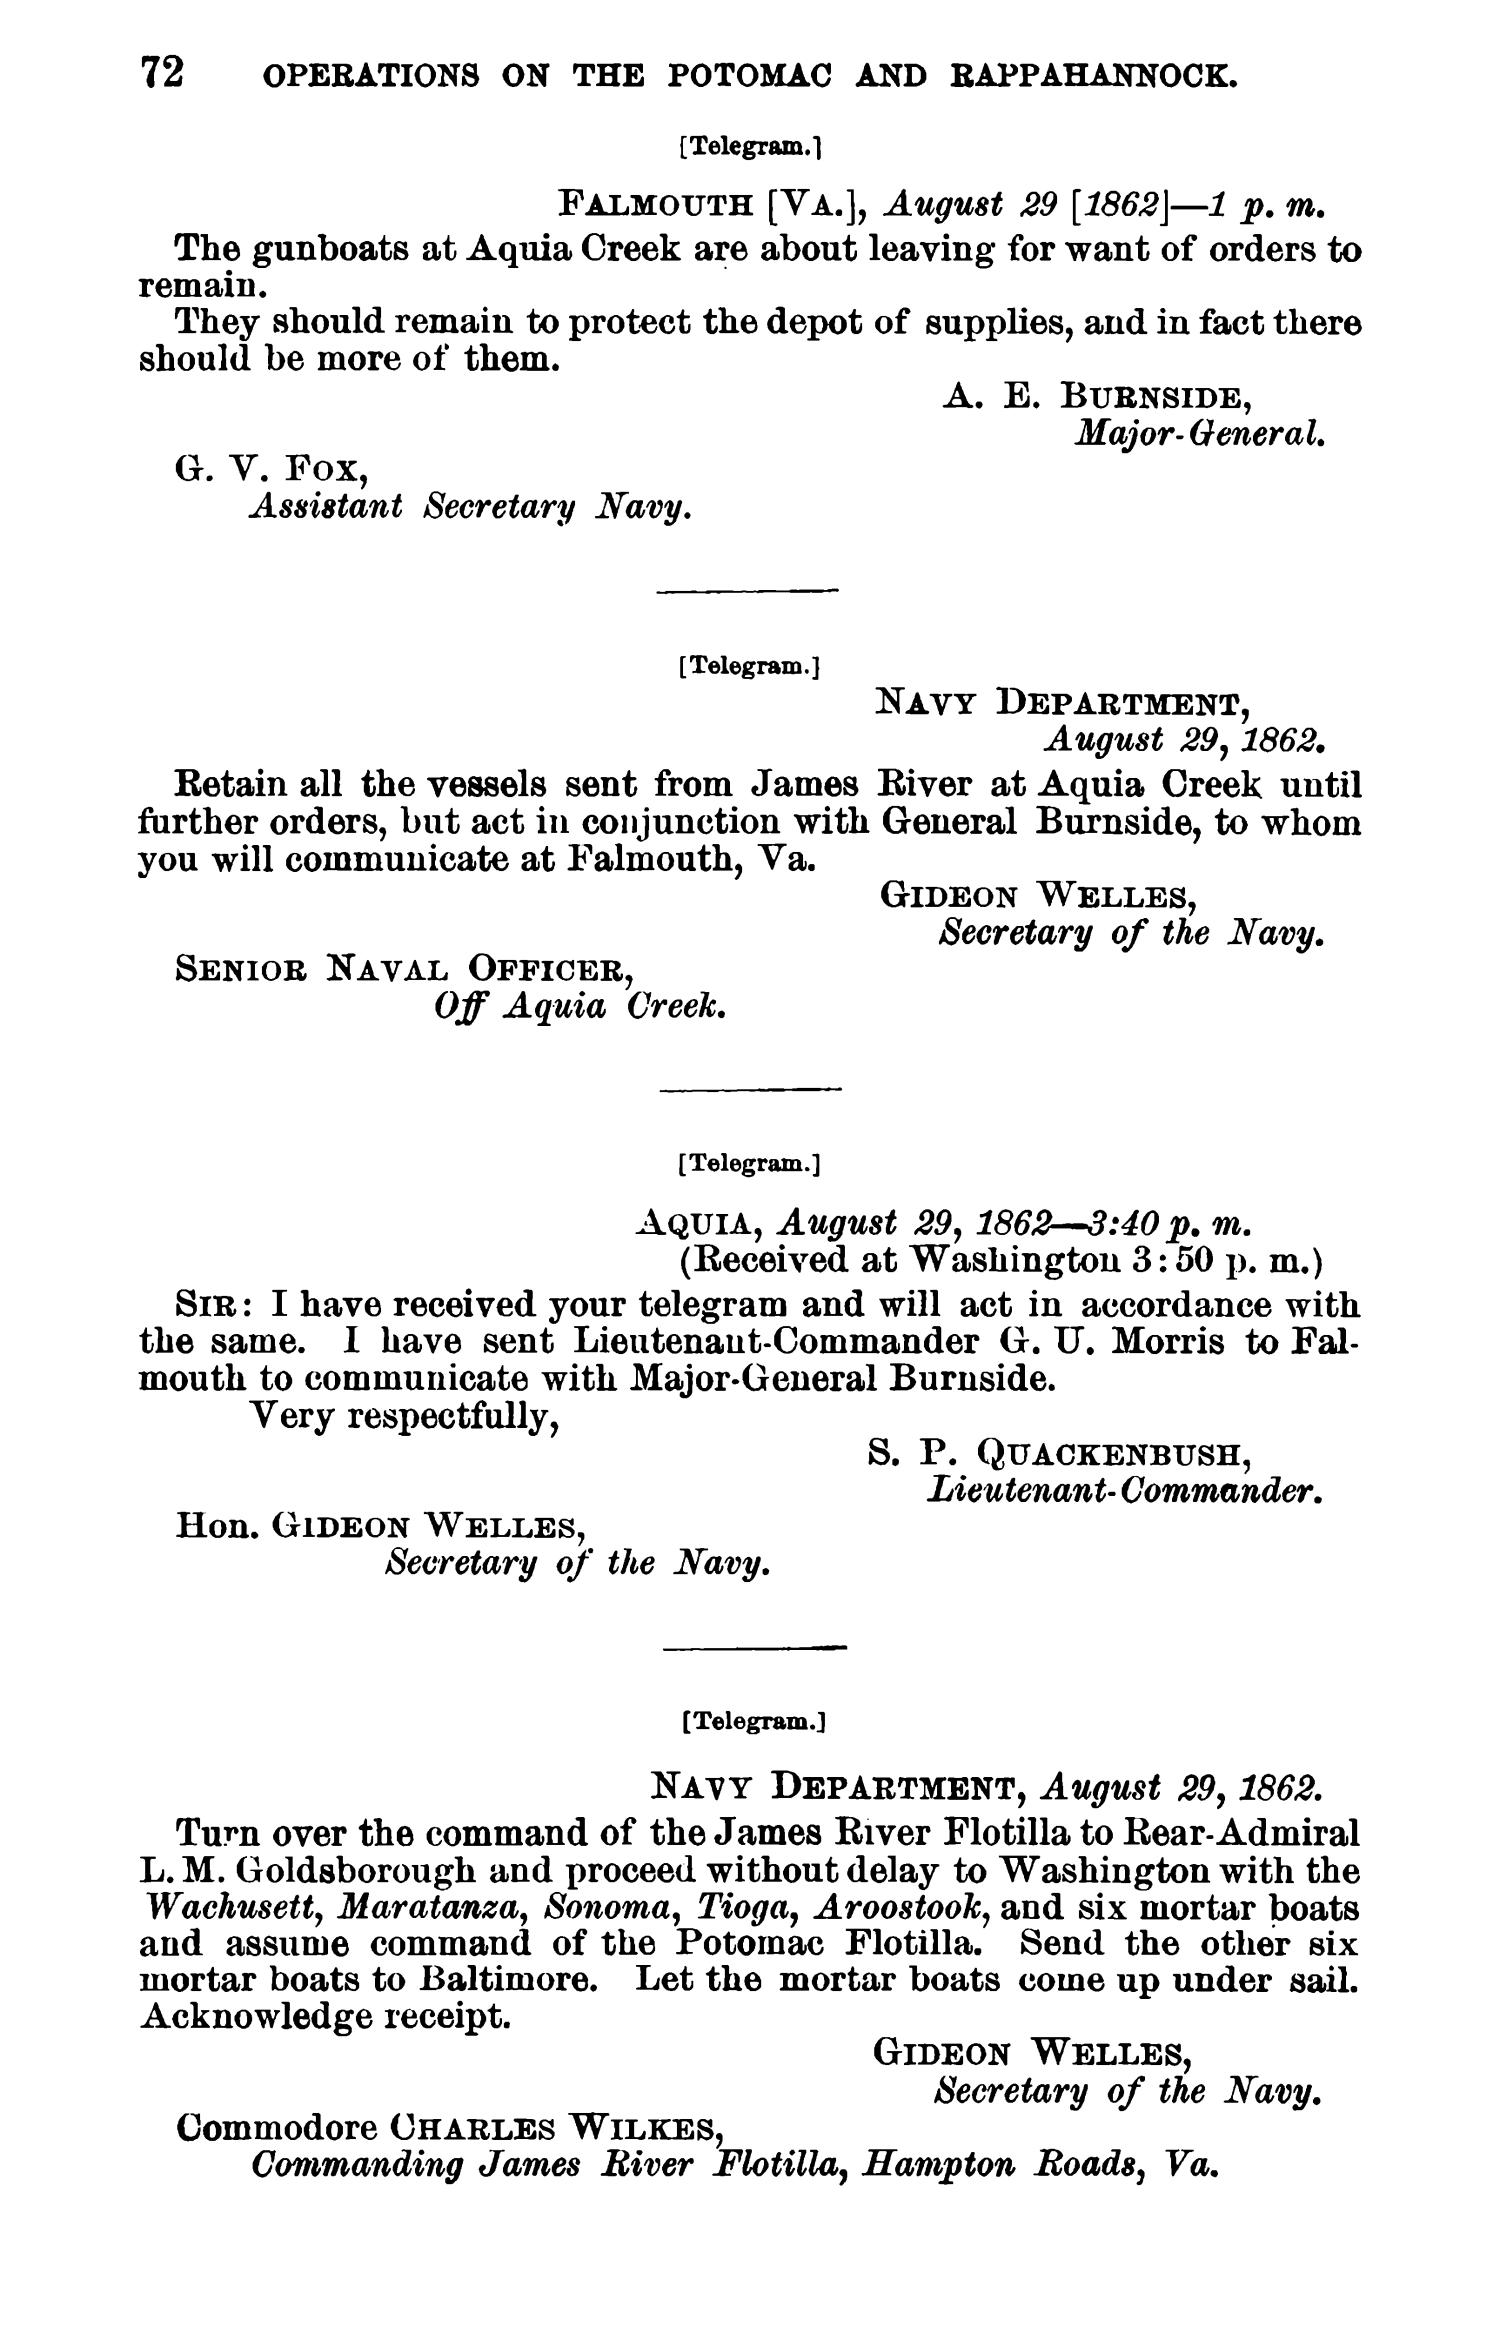 Official Records of the Union and Confederate Navies in the War of the Rebellion. Series 1, Volume 5.
                                                
                                                    72
                                                